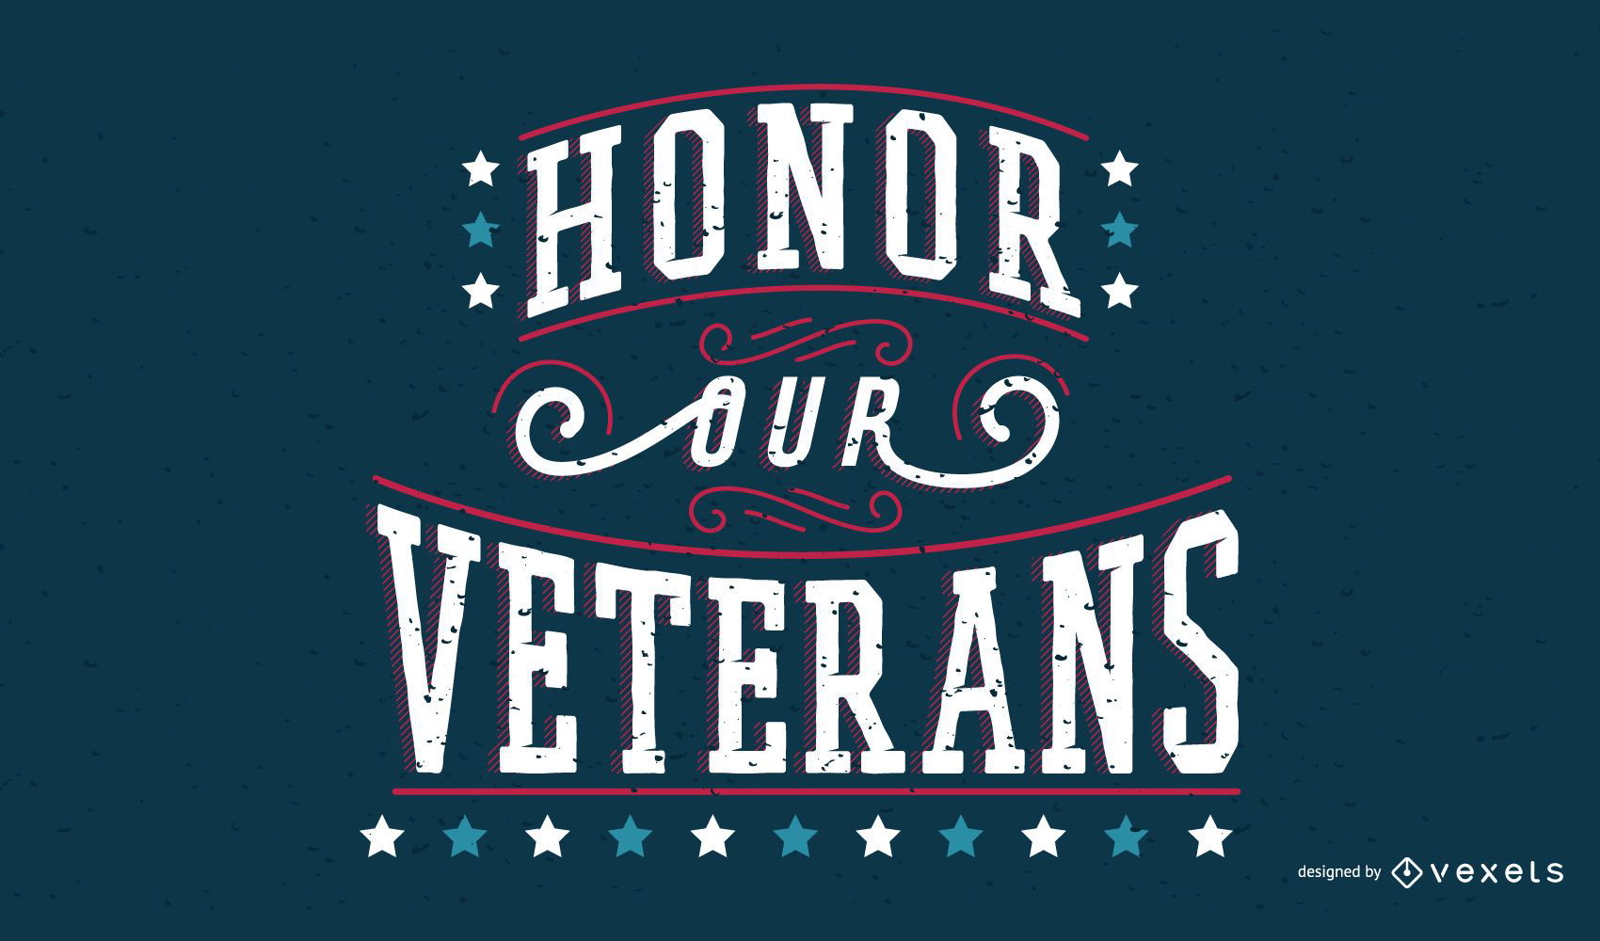 Veterans Day Quote Banner